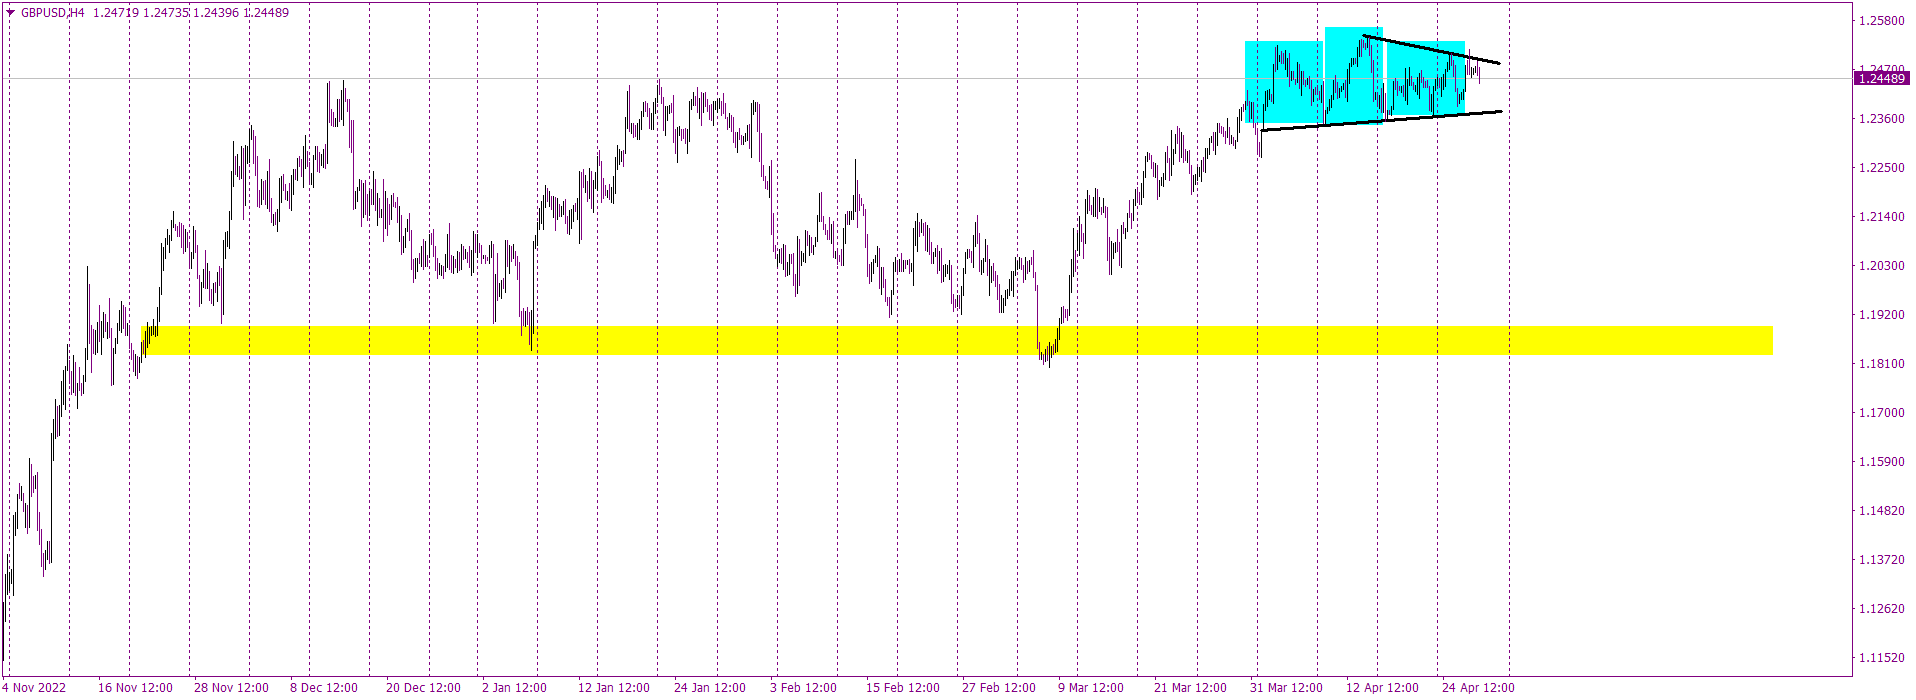 April as sideways move for GBPUSD